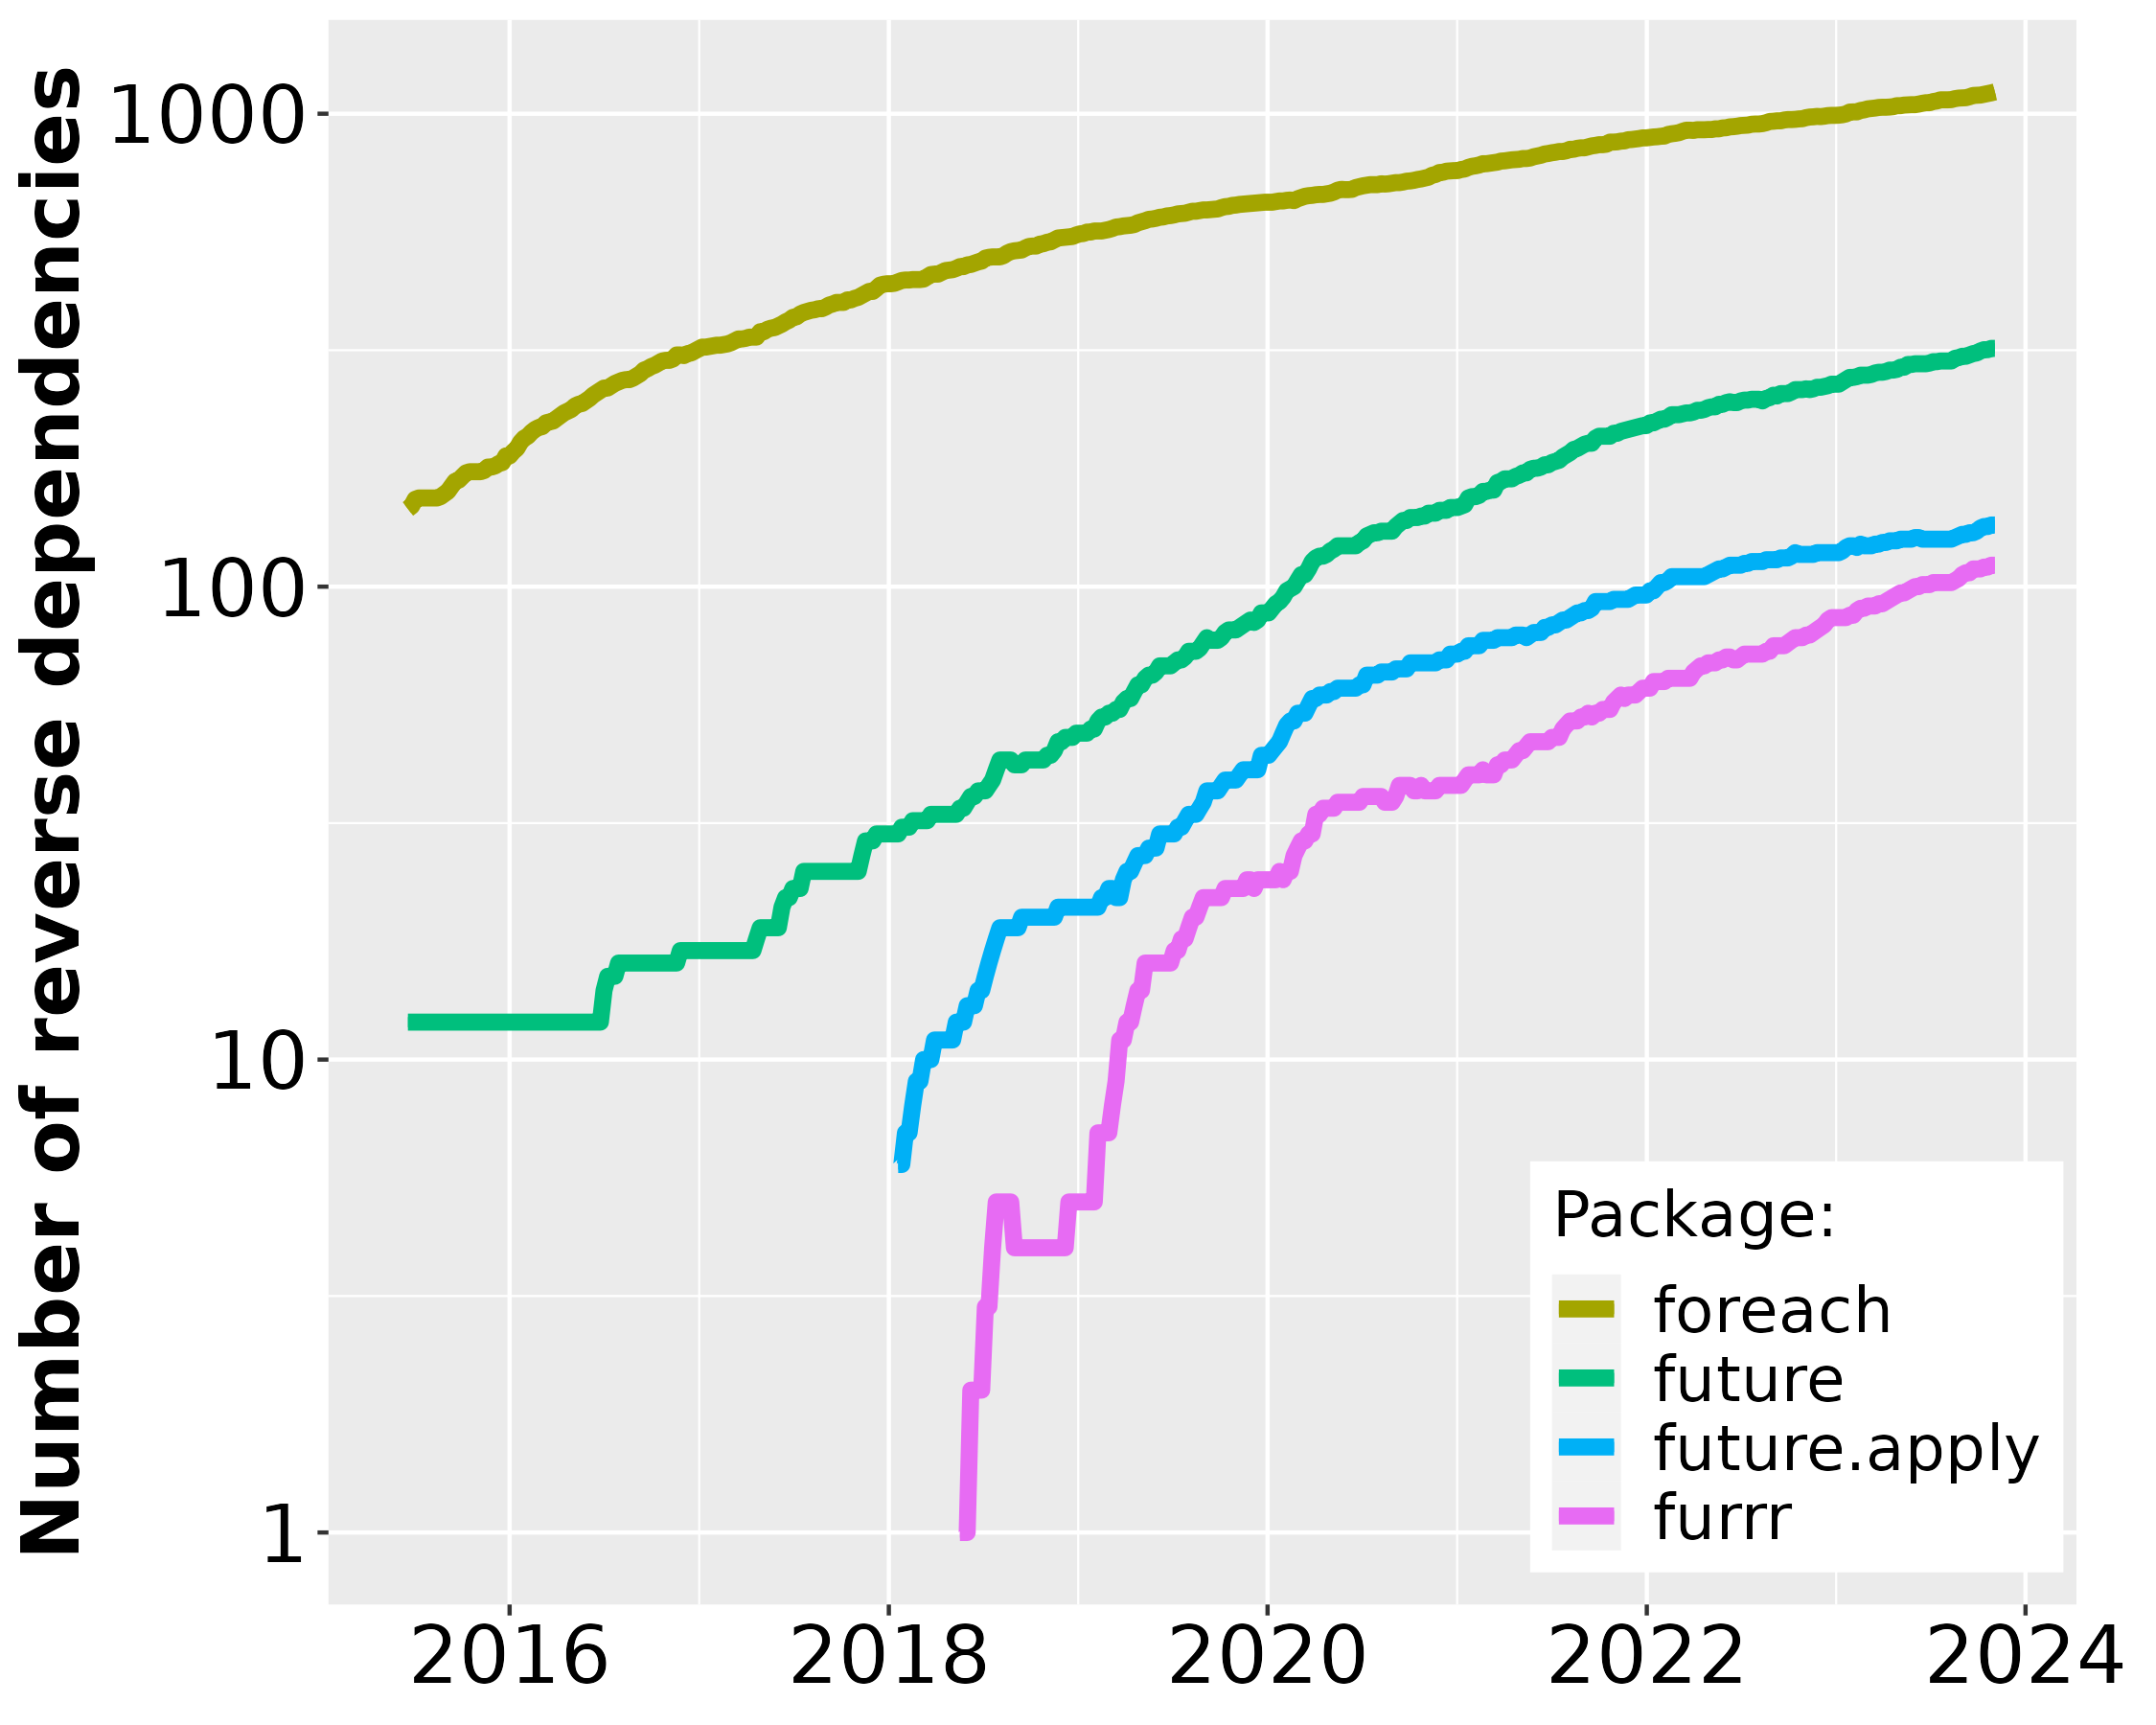 A line graph with 'Date' (2015-2022) on the horizontal axis and 'Number of reverse dependencies on CRAN' on the vertical axis, which is on the logarithmic scale. Curves for four packages, 'foreach', 'future', 'future.apply', and 'furrr', are shown, where foreach has more dependencies but with a lower slope than the others during recent years.